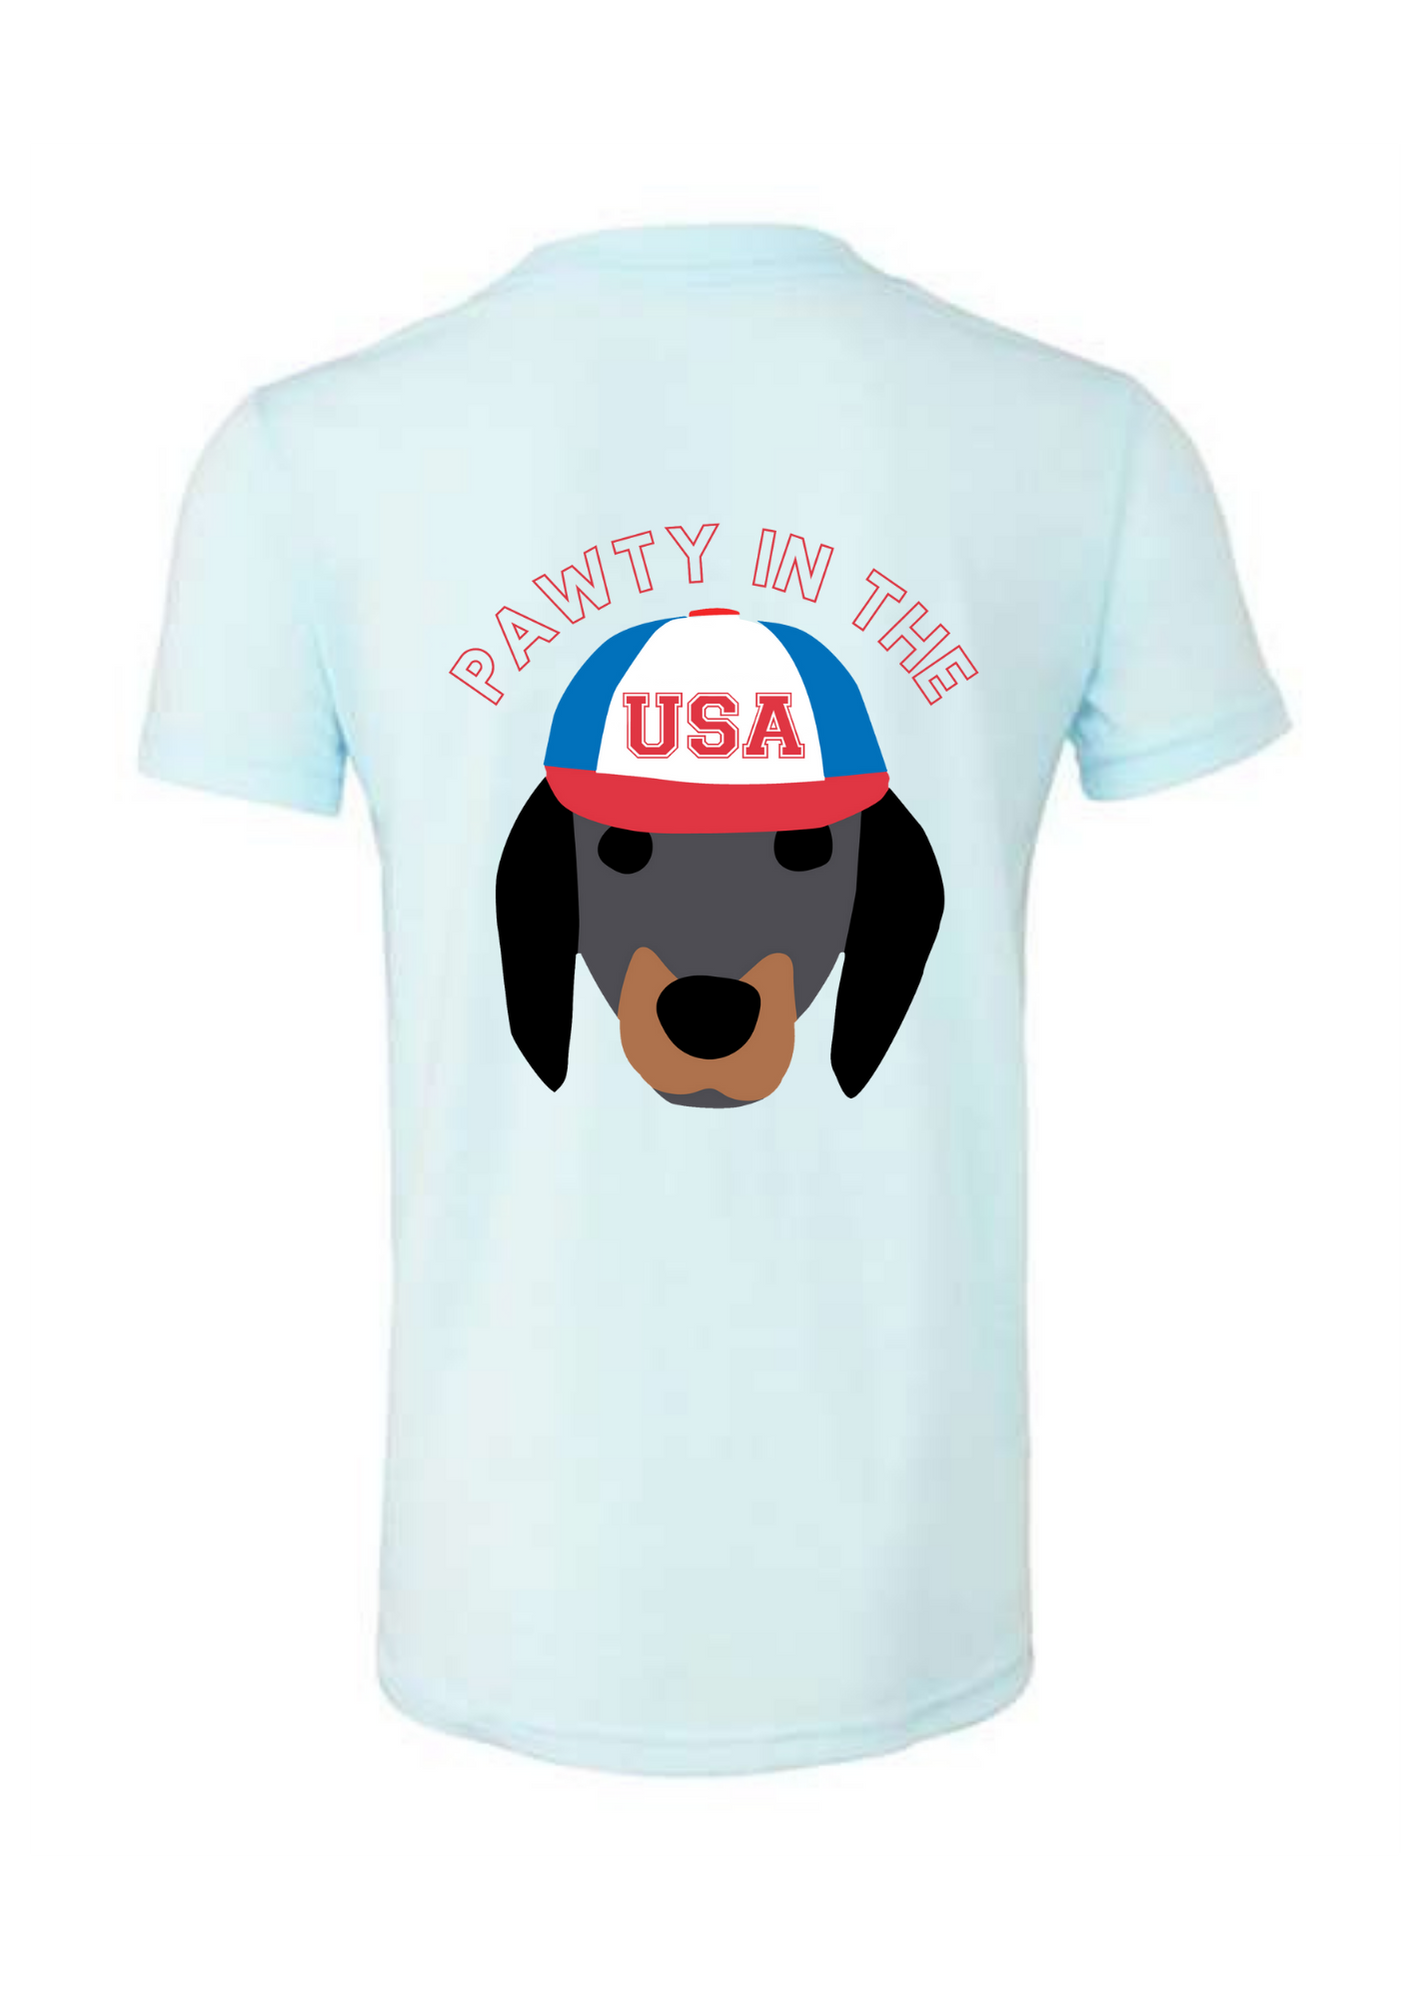 Pawty in the USA | Kids Tee | RTS-Sister Shirts-Sister Shirts, Cute & Custom Tees for Mama & Littles in Trussville, Alabama.